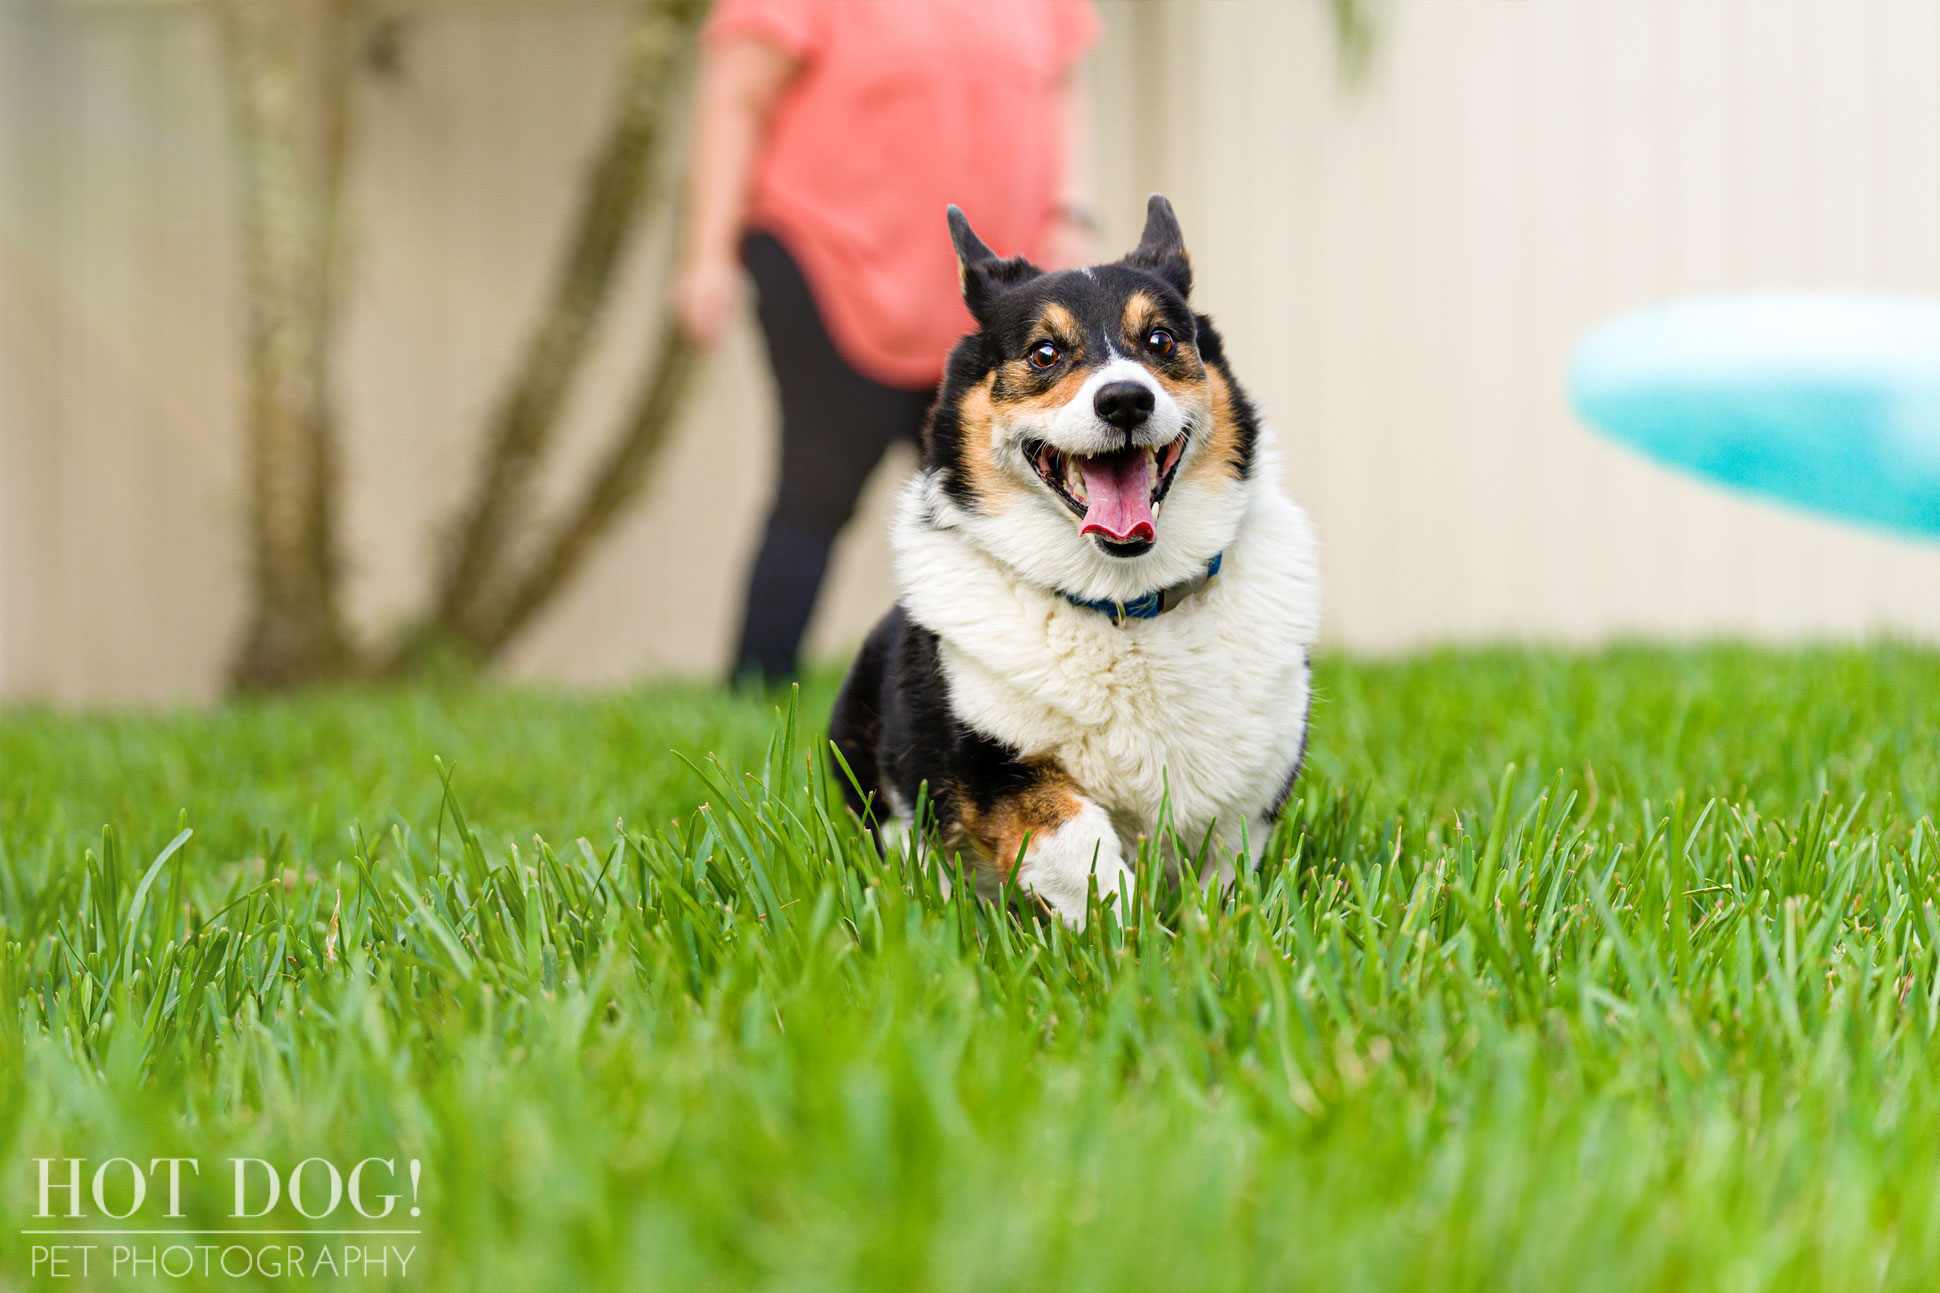 Snap chasing a Frisbee in this professional pet photo session with Hot Dog! Pet Photography.